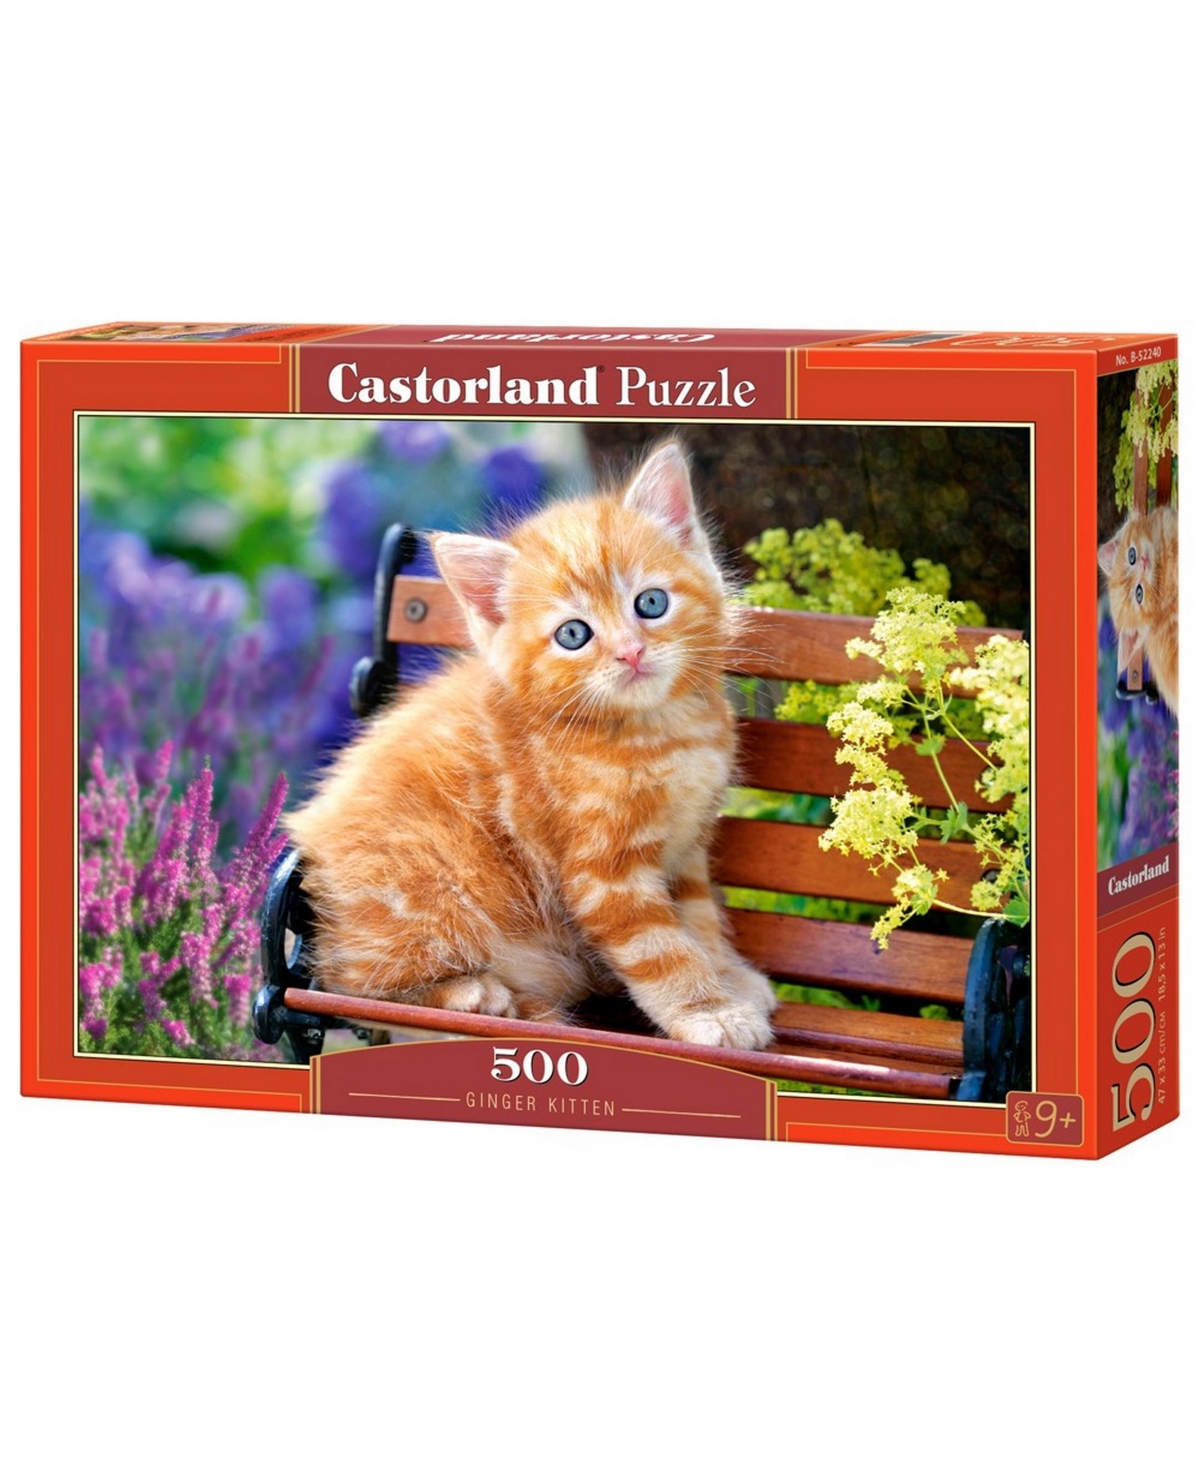 Castorland Ginger Kitten Jigsaw Puzzle Set, 500 Piece In Multicolor